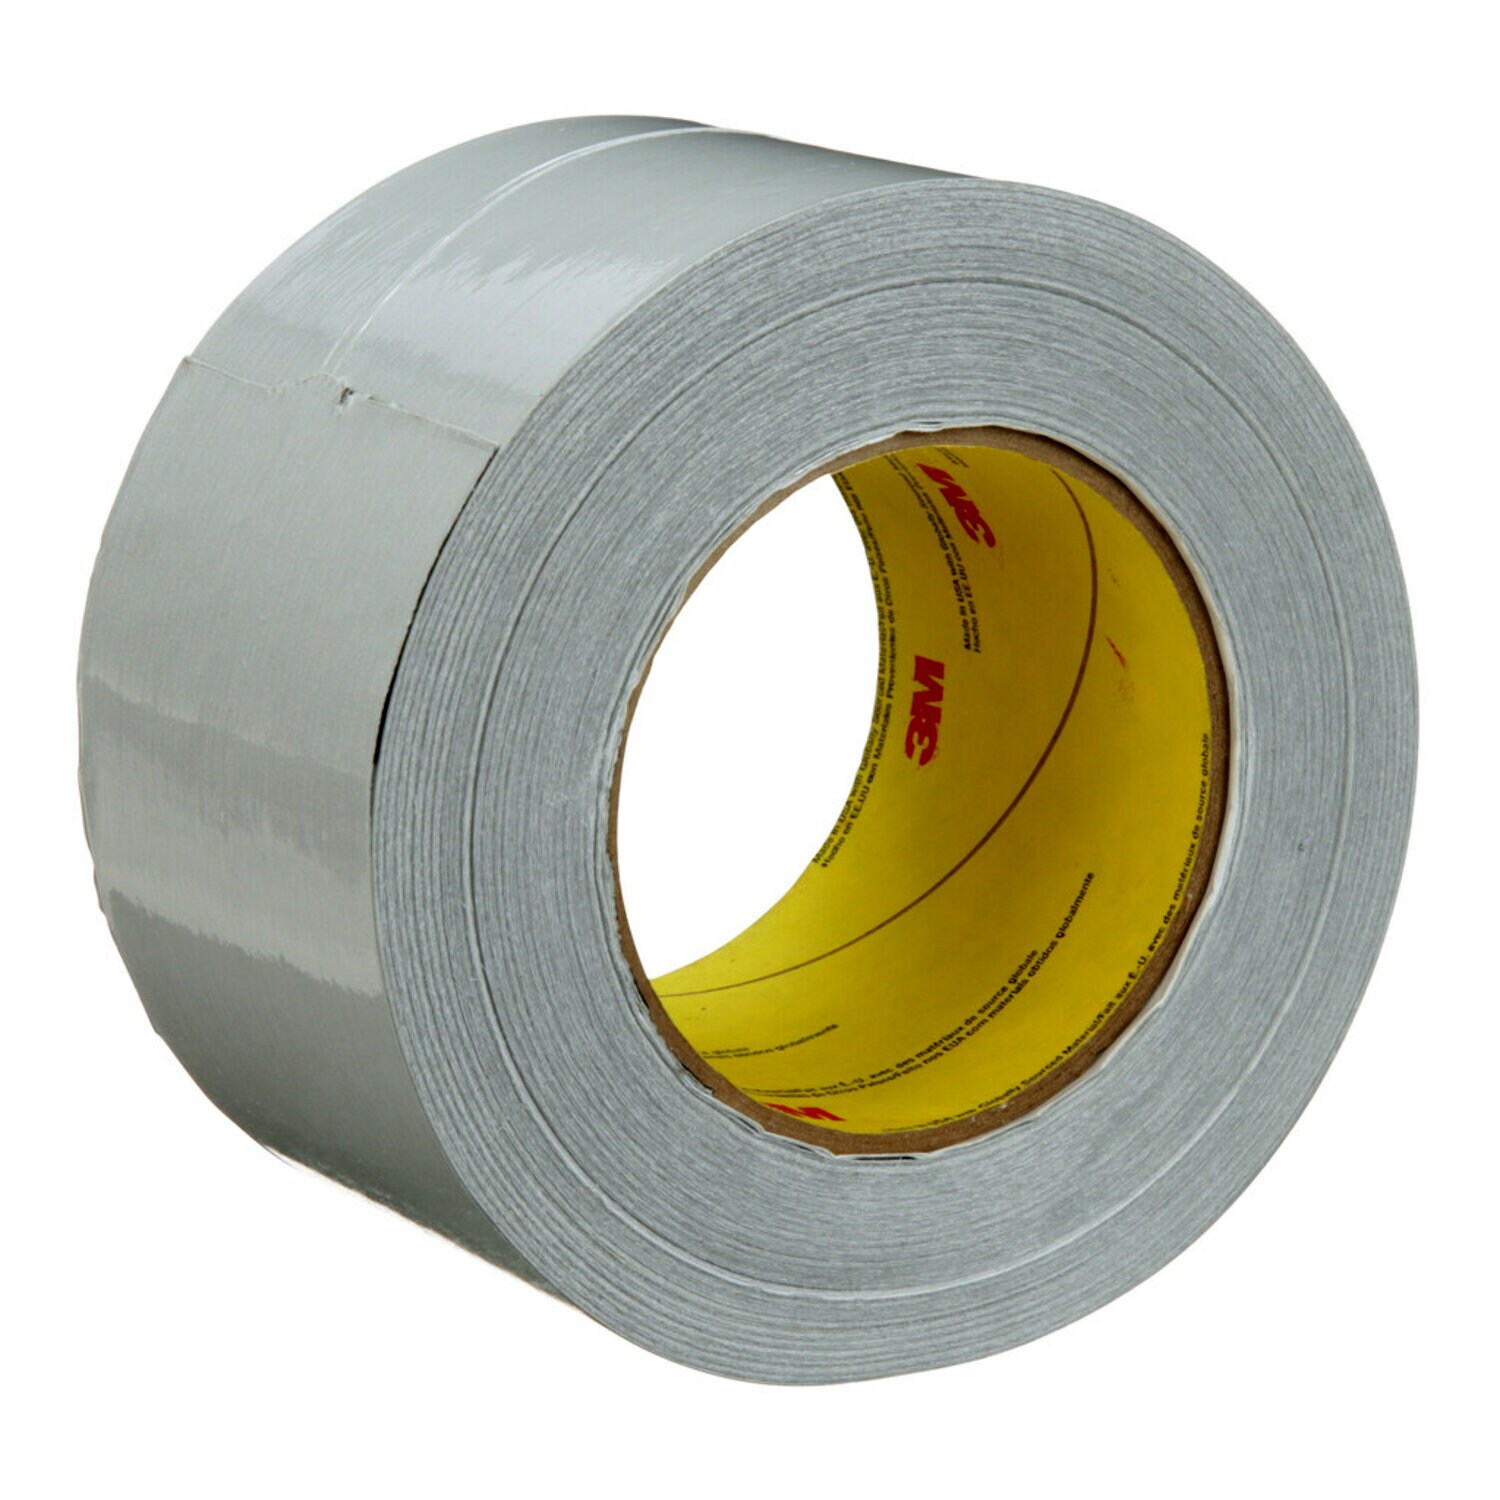 Heat Resistant High Temperature Adhesive Tape 1x Roll. (100Ft Long Roll)